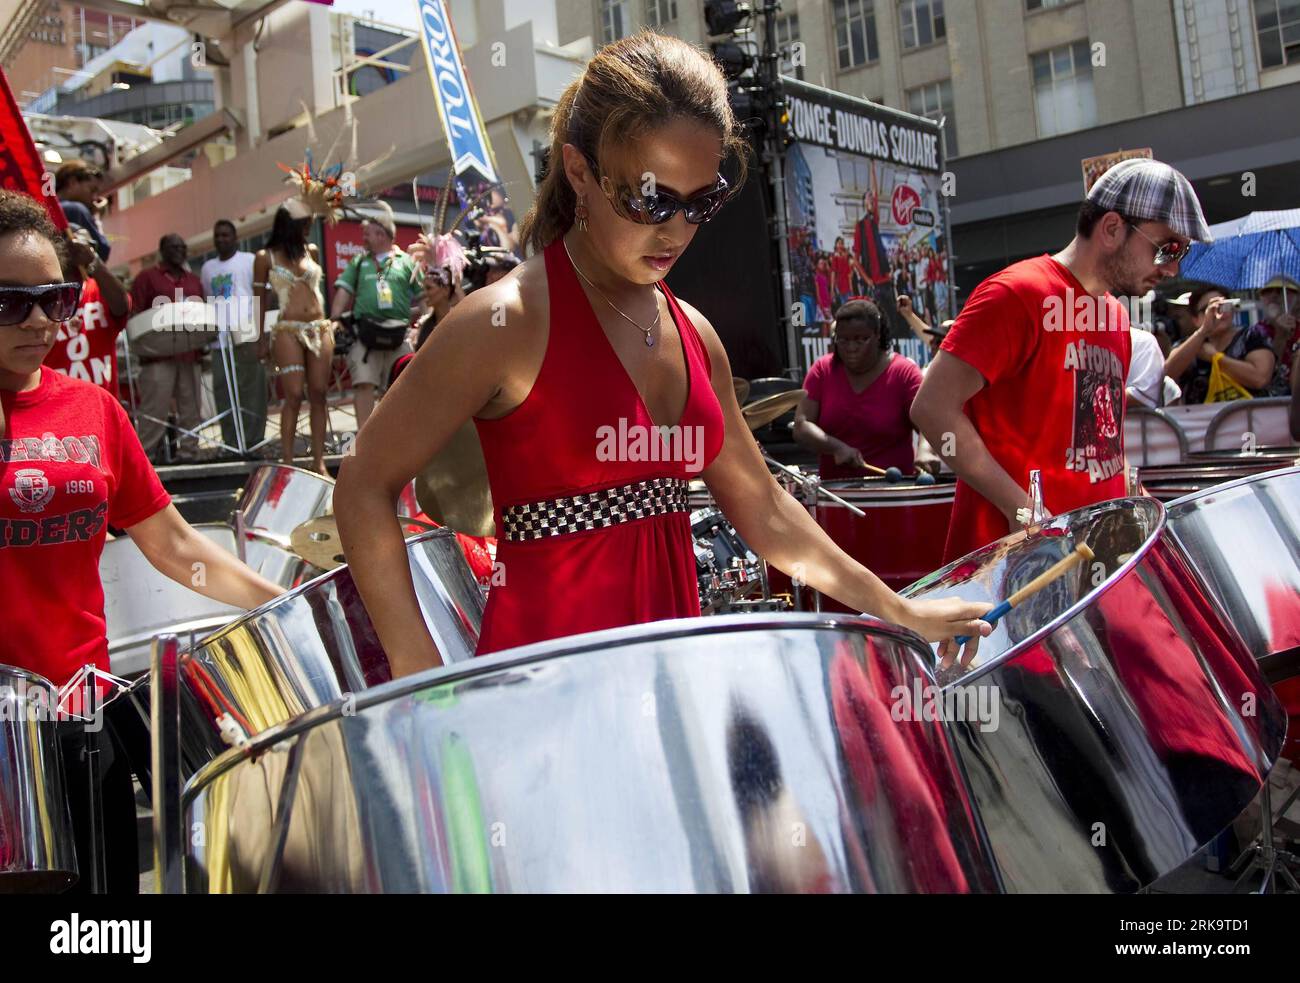 Bildnummer: 54230772  Datum: 15.07.2010  Copyright: imago/Xinhua  Drummers perform during the opening ceremony of the 43rd annual Caribana Toronto Festival in Toronto, Canada, July 15, 2010. The festival kicked off here on Thursday. (Xinhua/Zou Zheng) (gj) (2)CANADA-TORONTO-CARIBANA FESTIVAL PUBLICATIONxNOTxINxCHN Gesellschaft Tradition Feste premiumd xint kbdig xsk 2010 quer    Bildnummer 54230772 Date 15 07 2010 Copyright Imago XINHUA Drummers perform during The Opening Ceremony of The 43rd Annual  Toronto Festival in Toronto Canada July 15 2010 The Festival kicked off Here ON Thursday XINHU Stock Photo